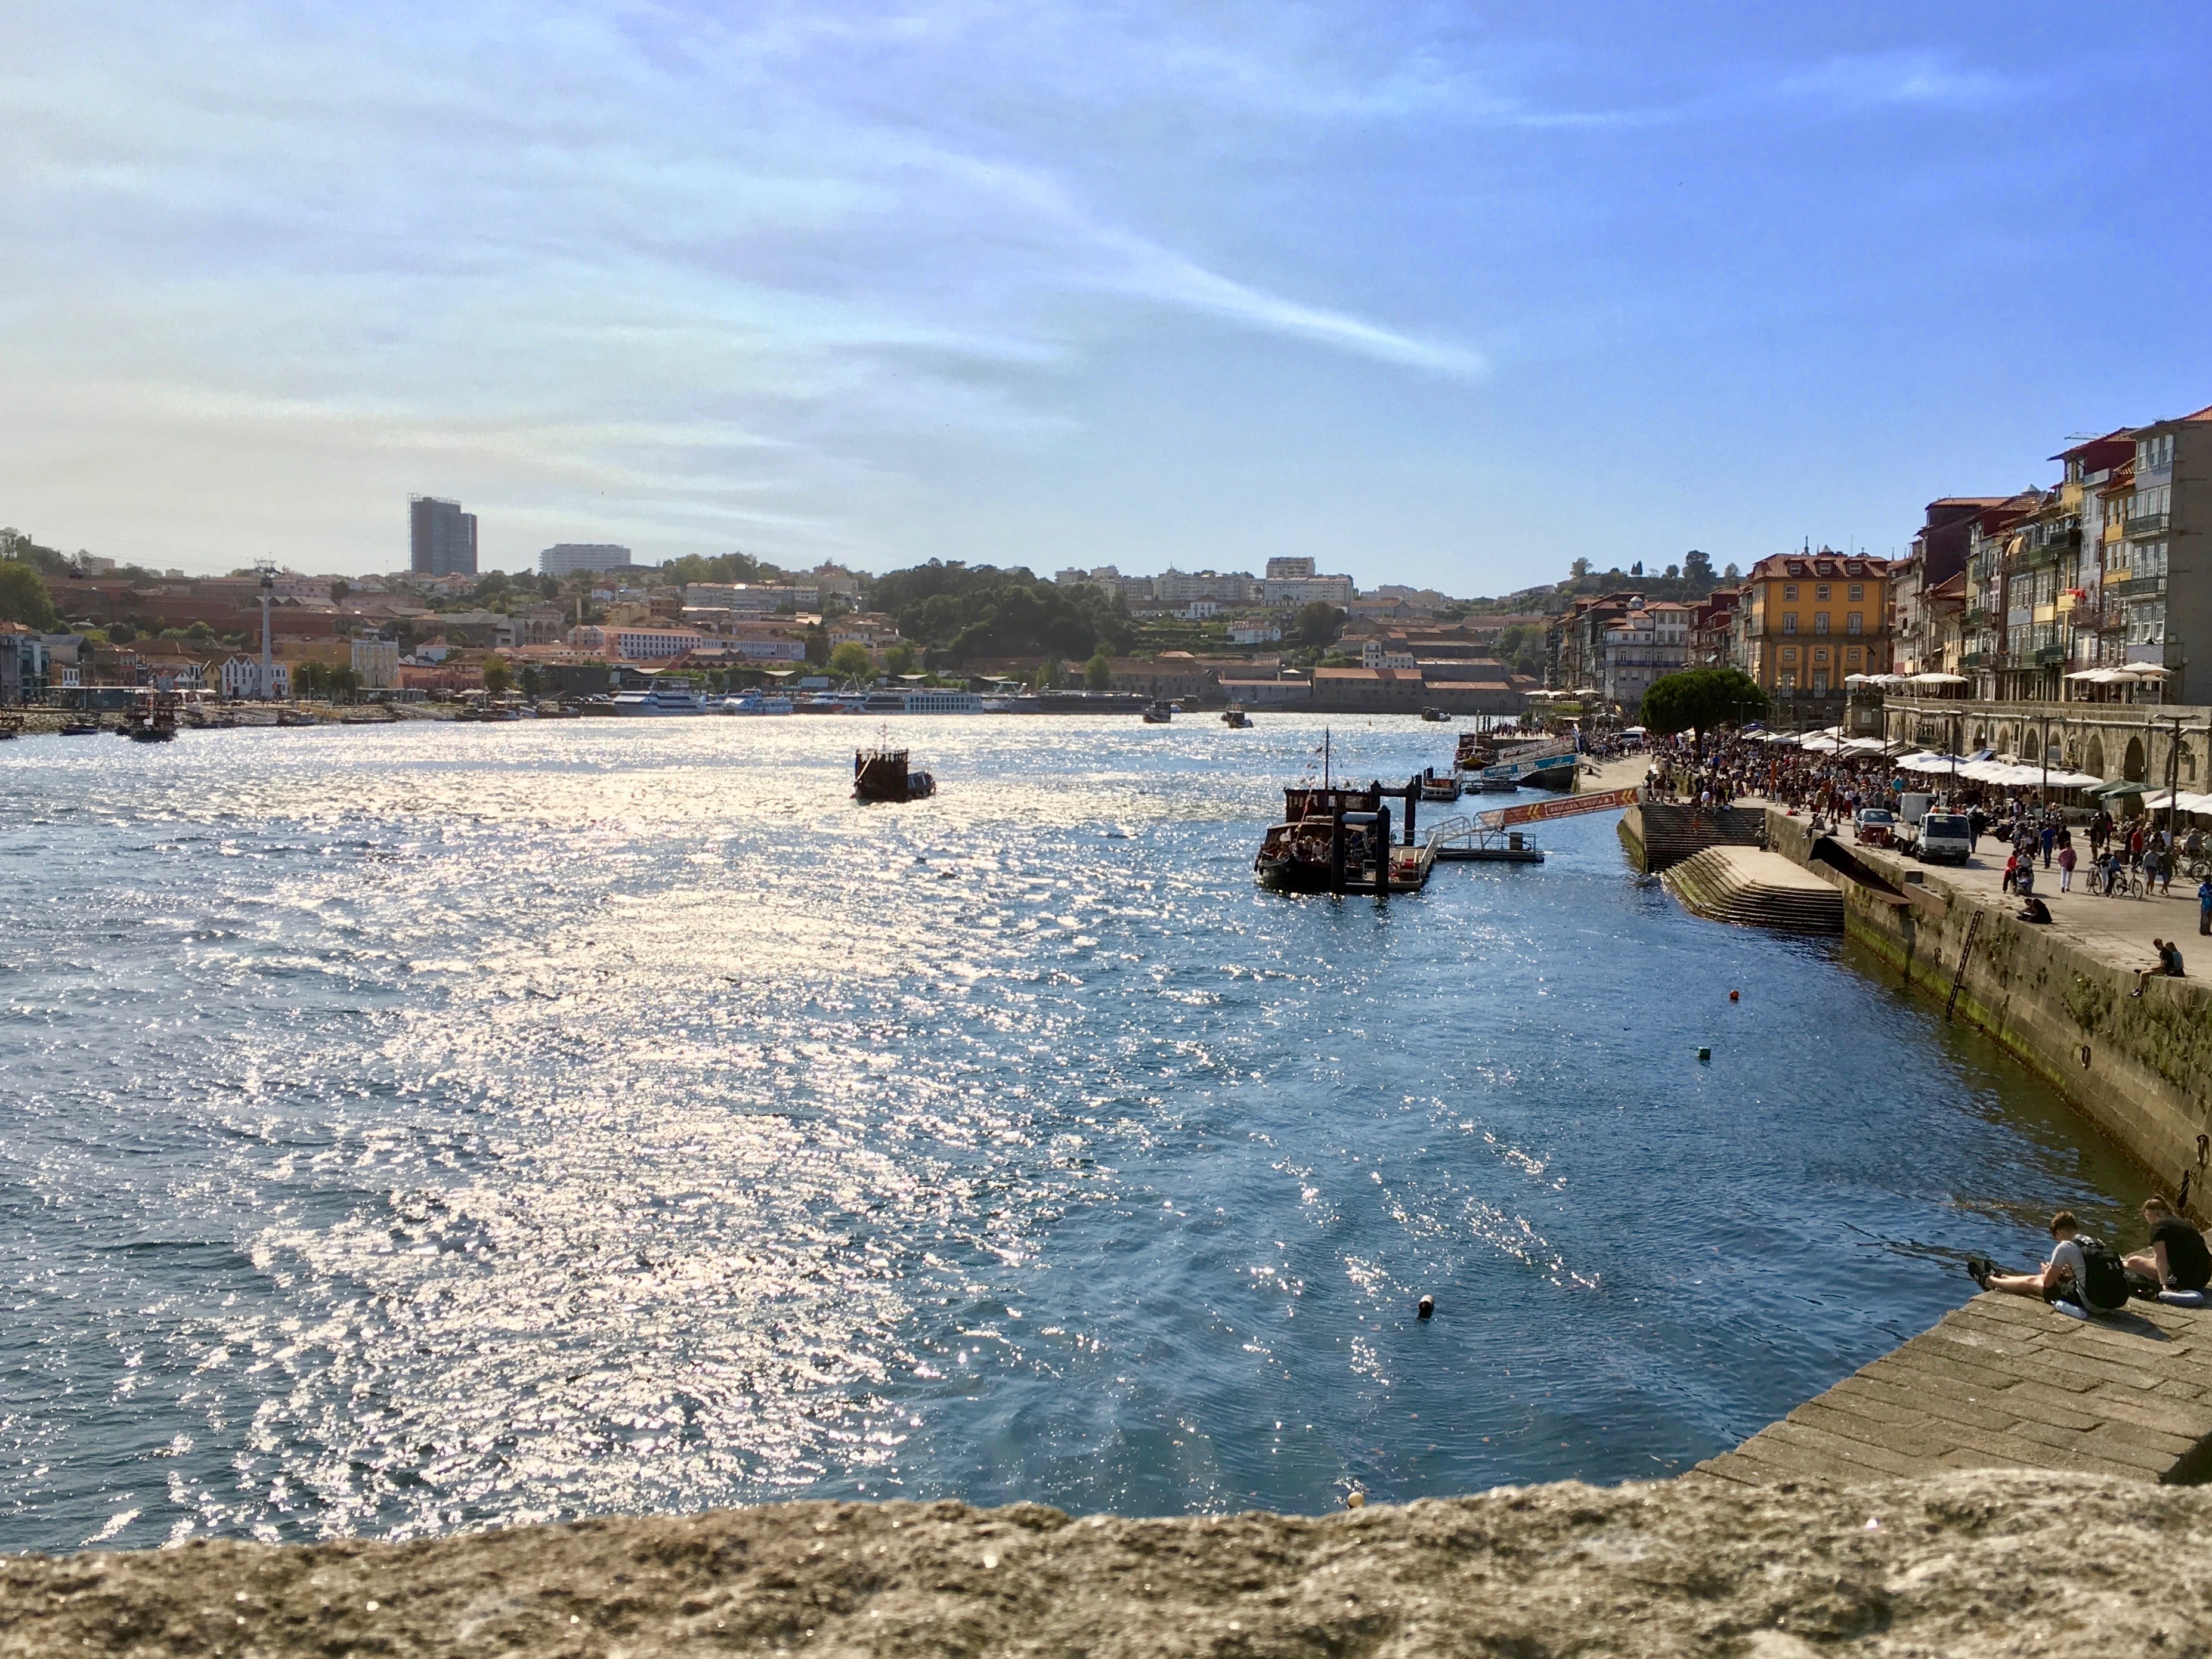 View of the sun shining brightly on the Douro river and the Ribeira from Bar Ponte Pensil